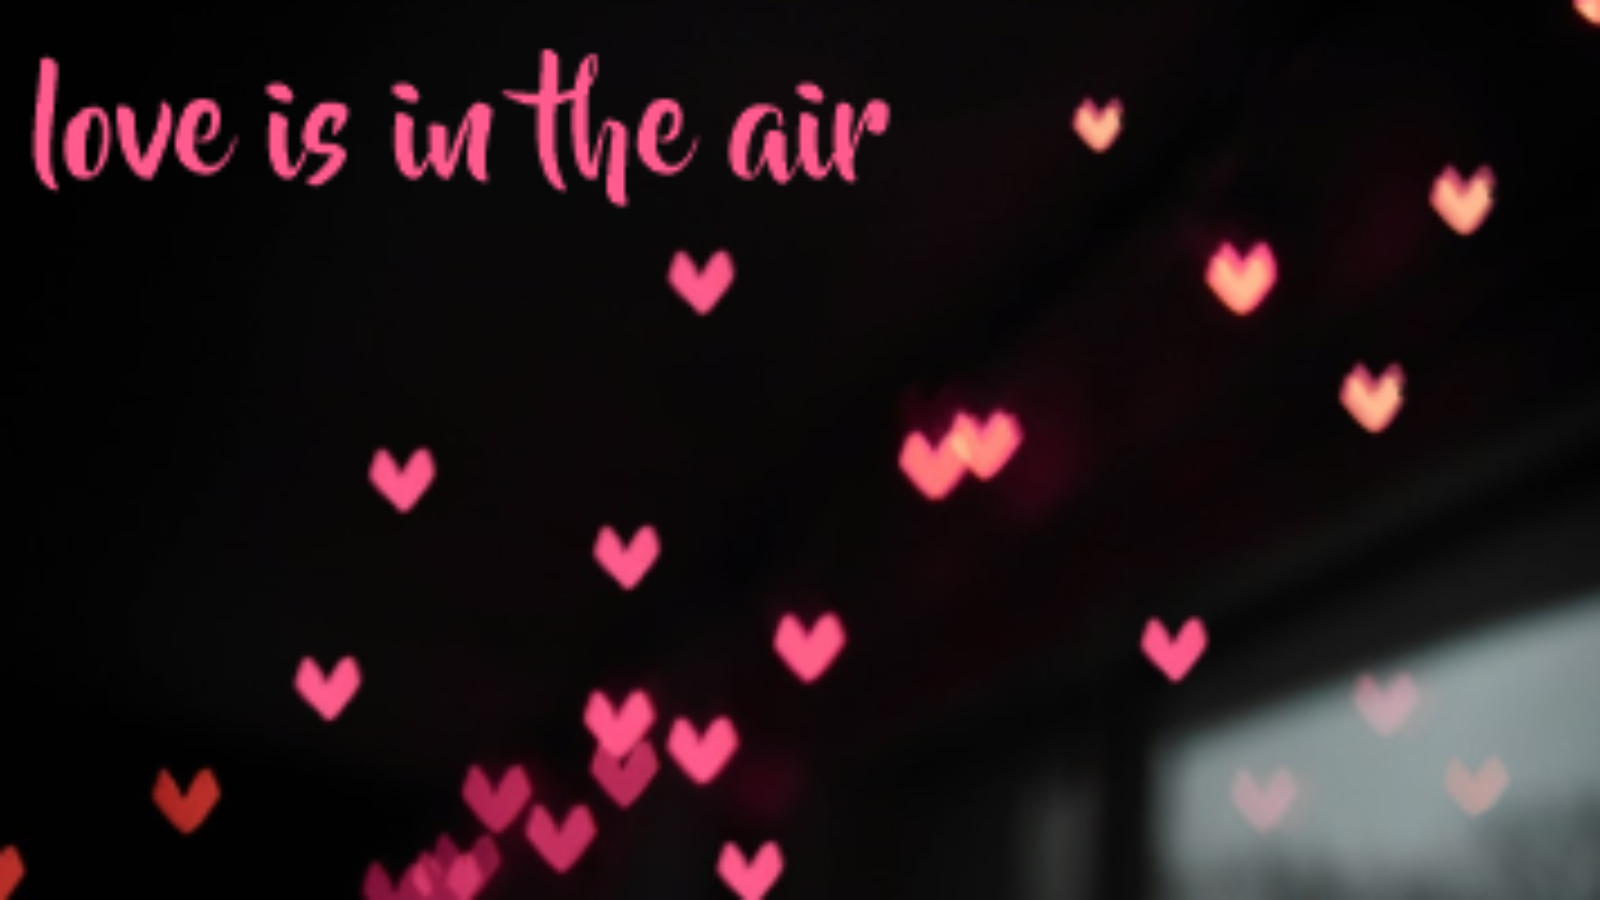 Makerspace - Love is in the air